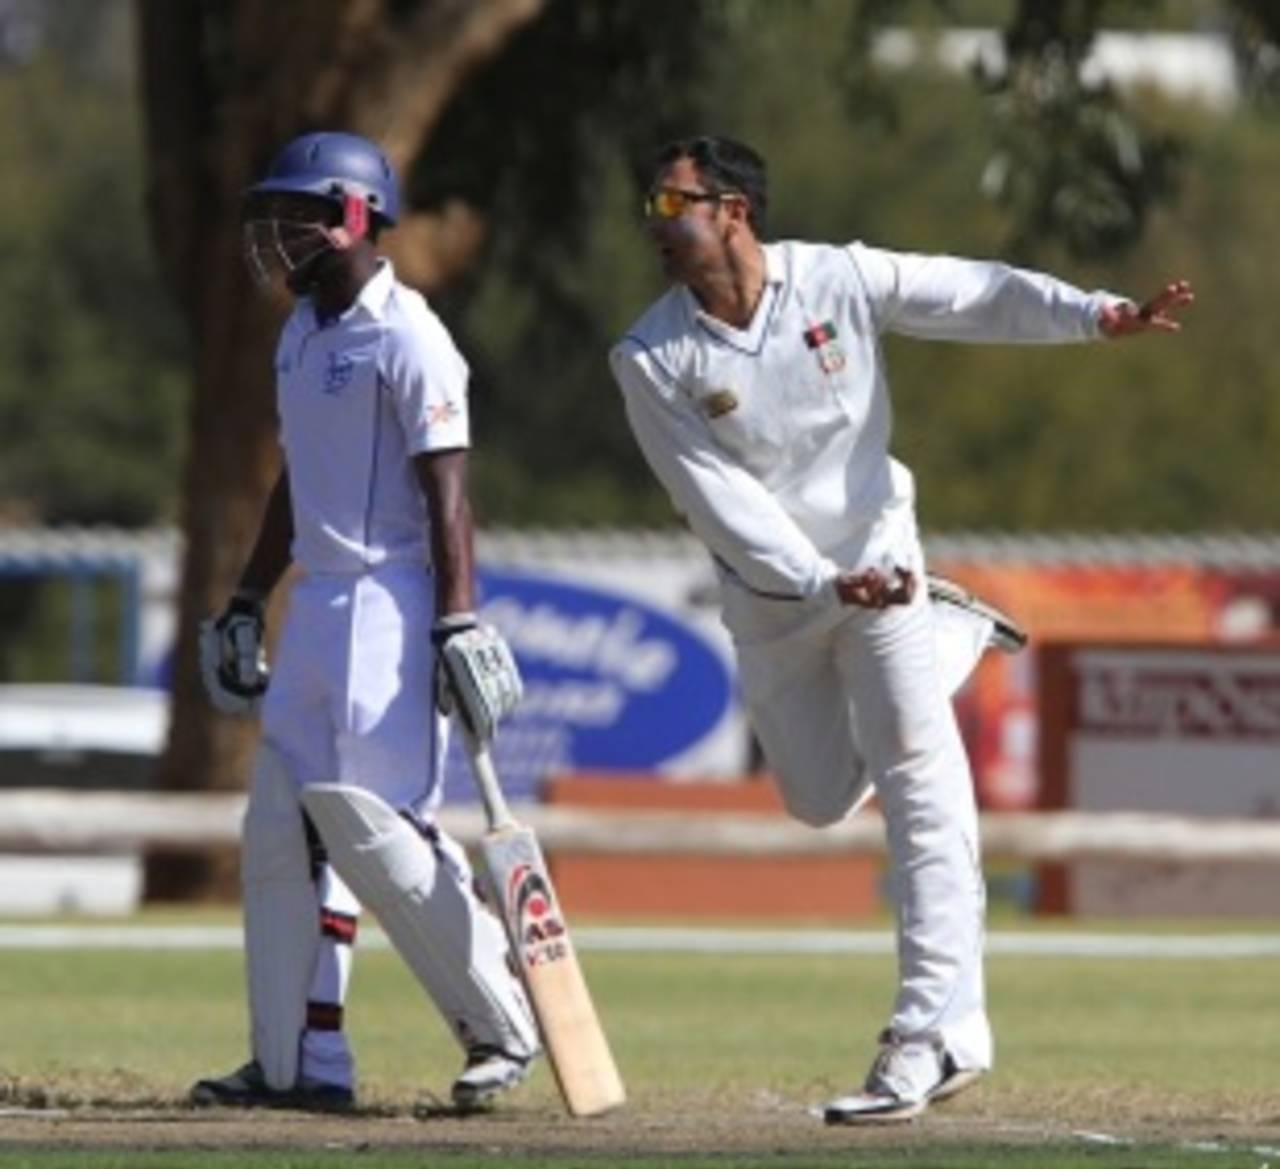 Mohammad Nabi finished with 6 for 33, Namibia v Afghanistan, ICC Intercontinental Cup, 1st day, Windhoek, August 4, 2013